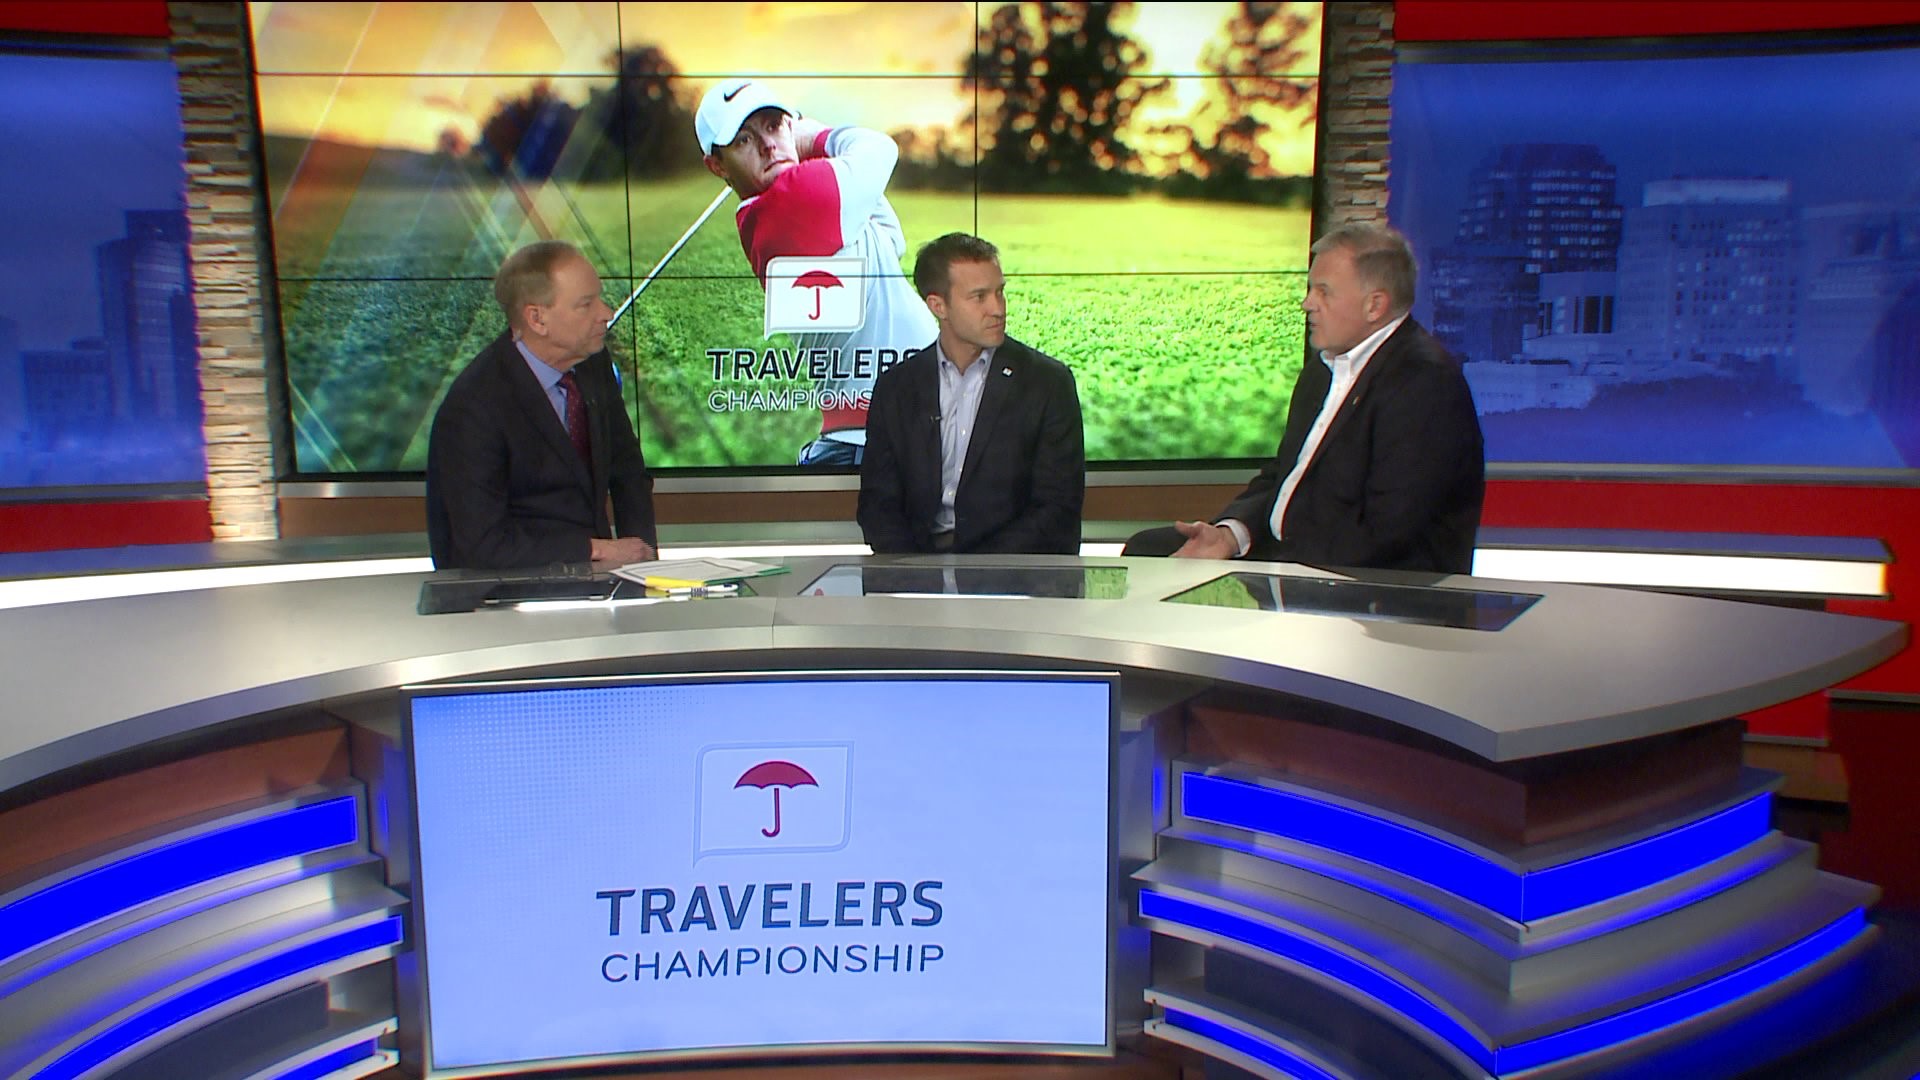 Rory Mcllroy to play in 2017 Travelers Championship for the first time